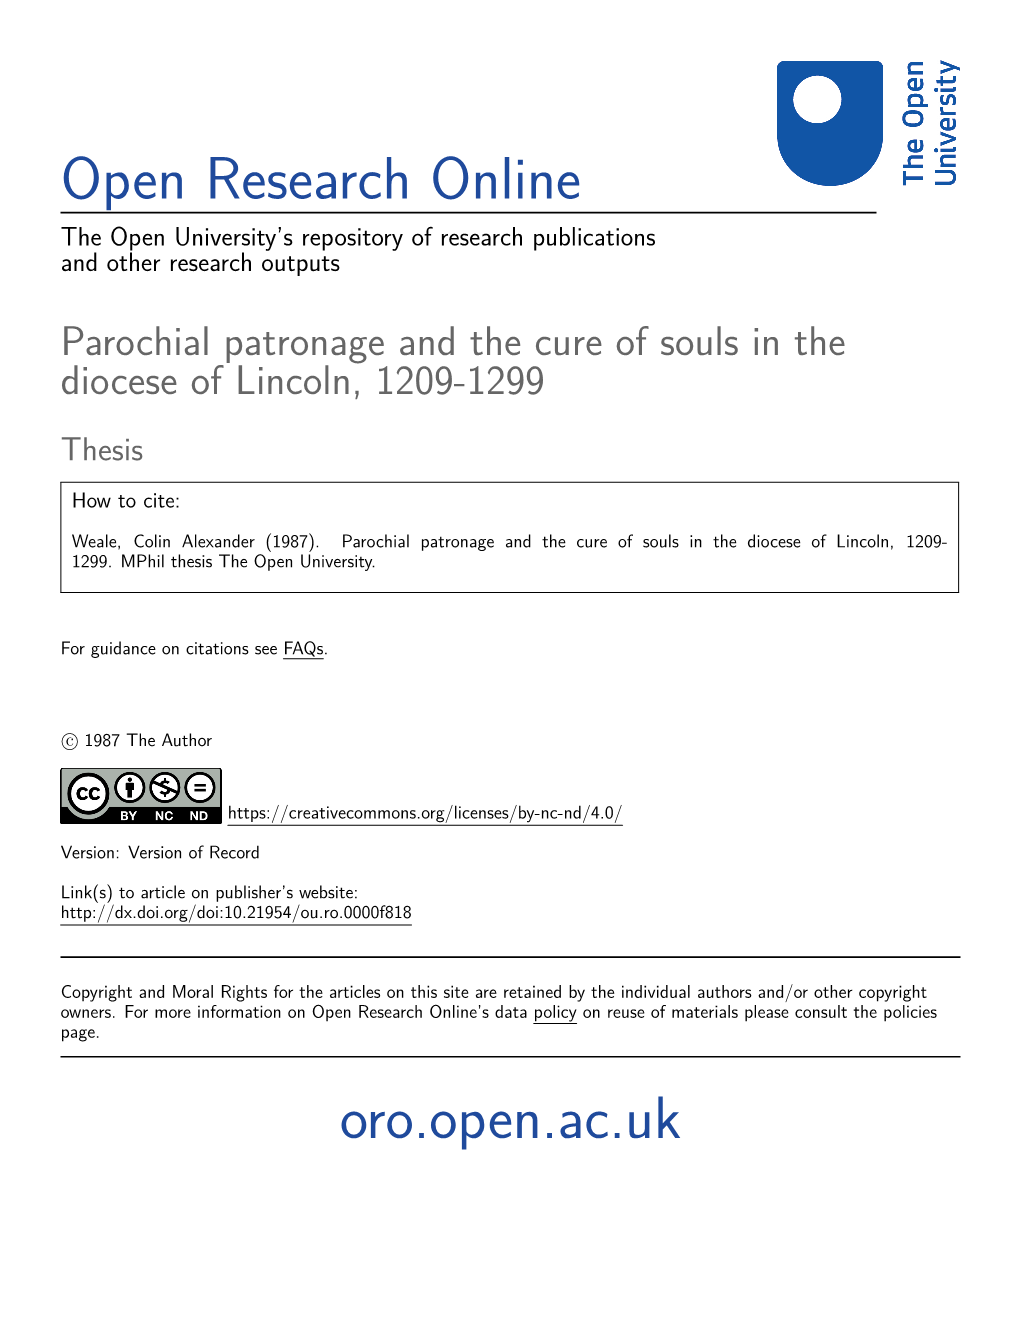 Parochial Patronage and the Cure of Souls in the Diocese of Lincoln, 1209-1299 Thesis